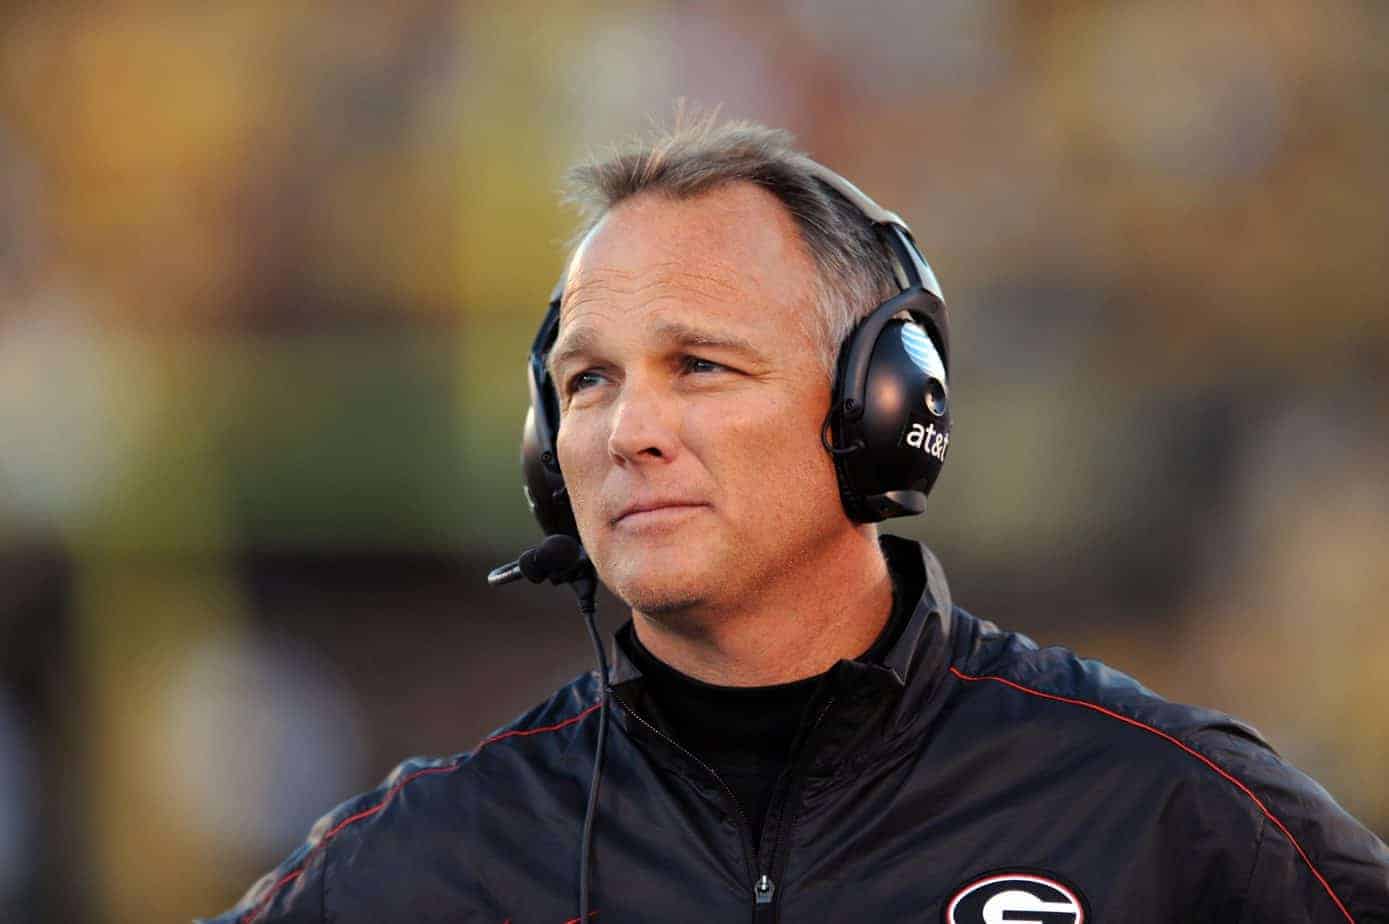 Former Georgia and Miami head football coach Mark Richt took to social media to reveal that he has been diagnosed with Parkinsons Disease